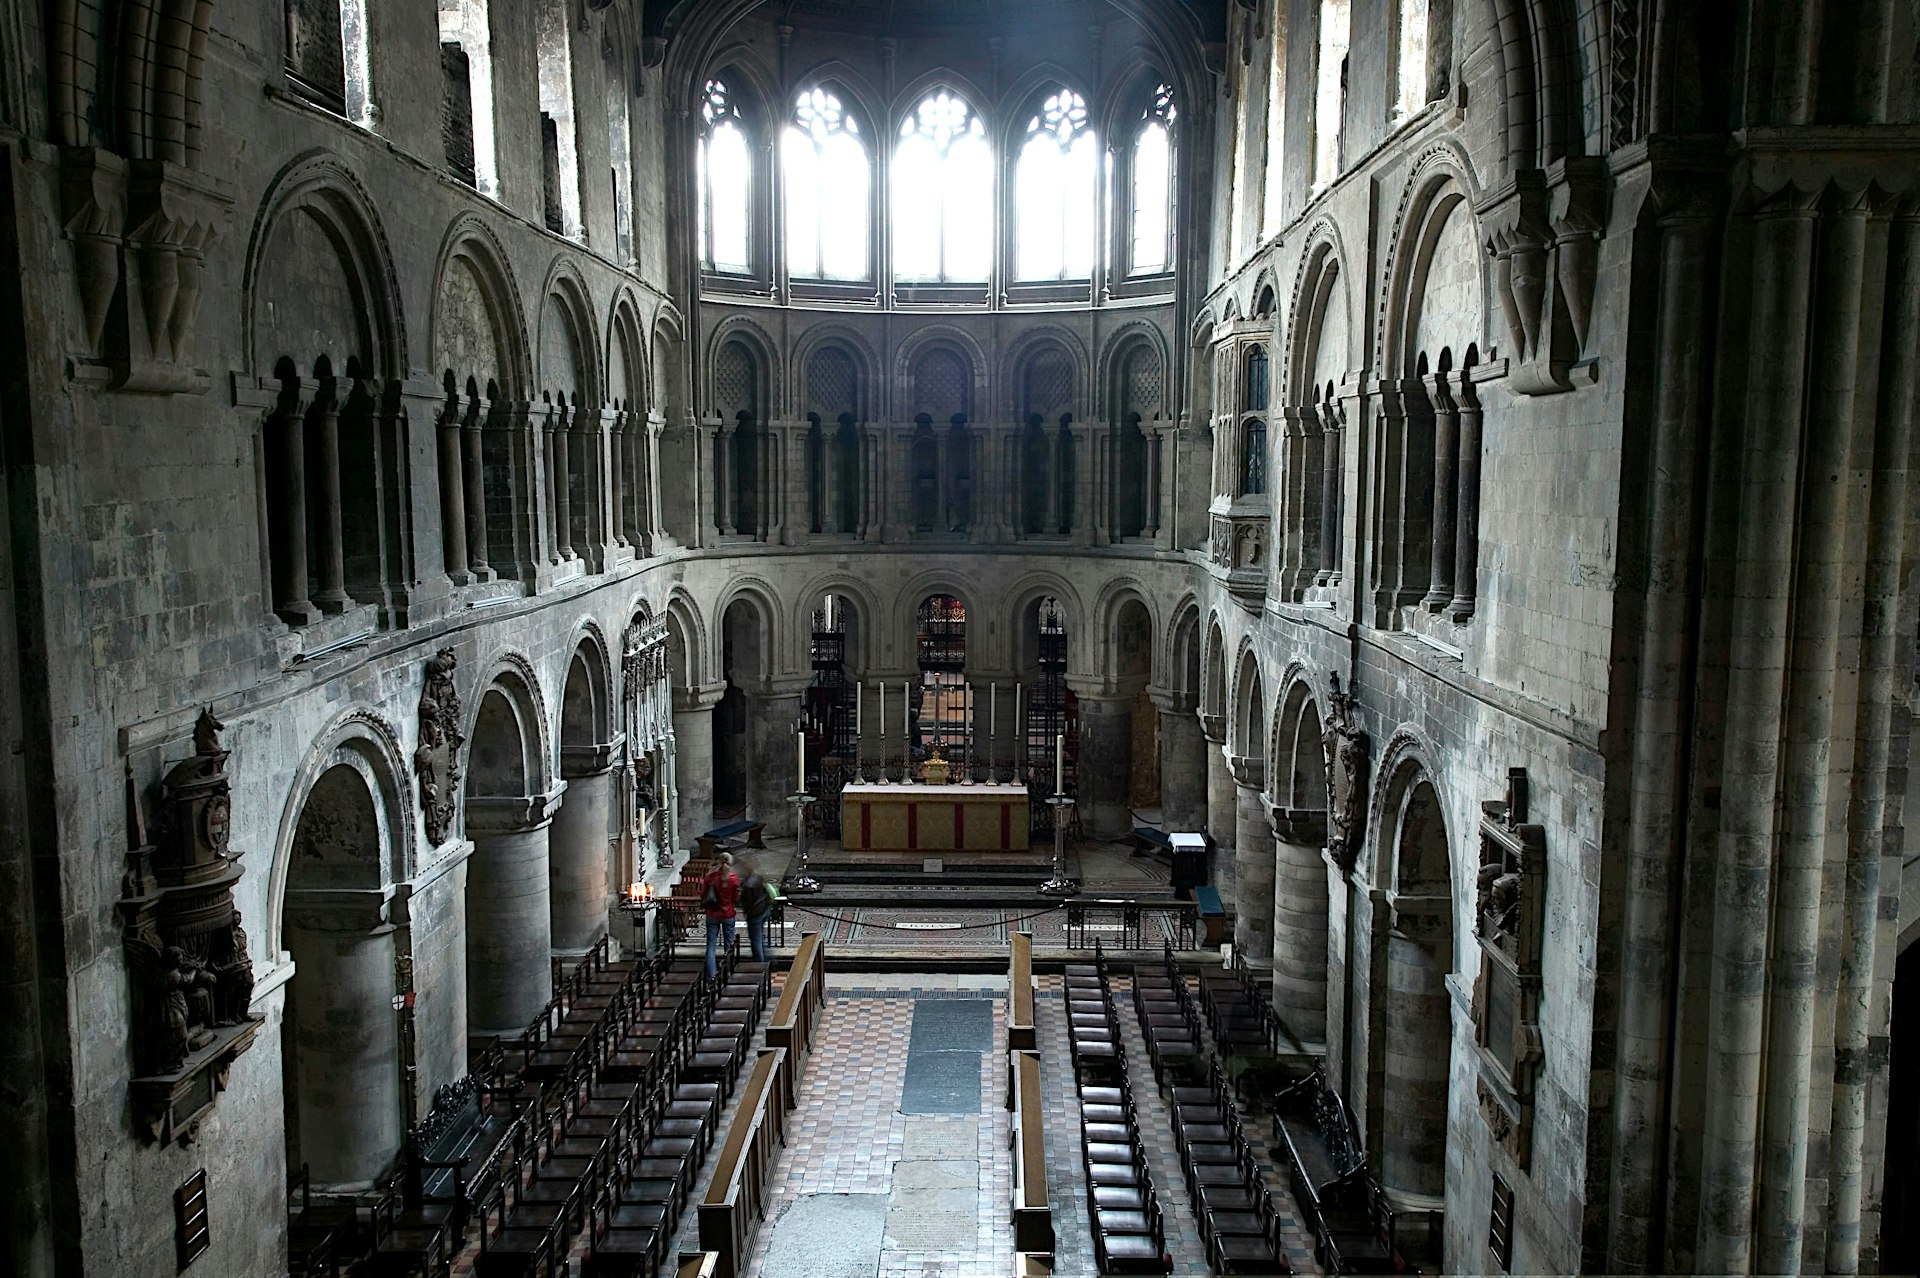 The interior of St Bartholomew-the-Great church is one of London's oldest.